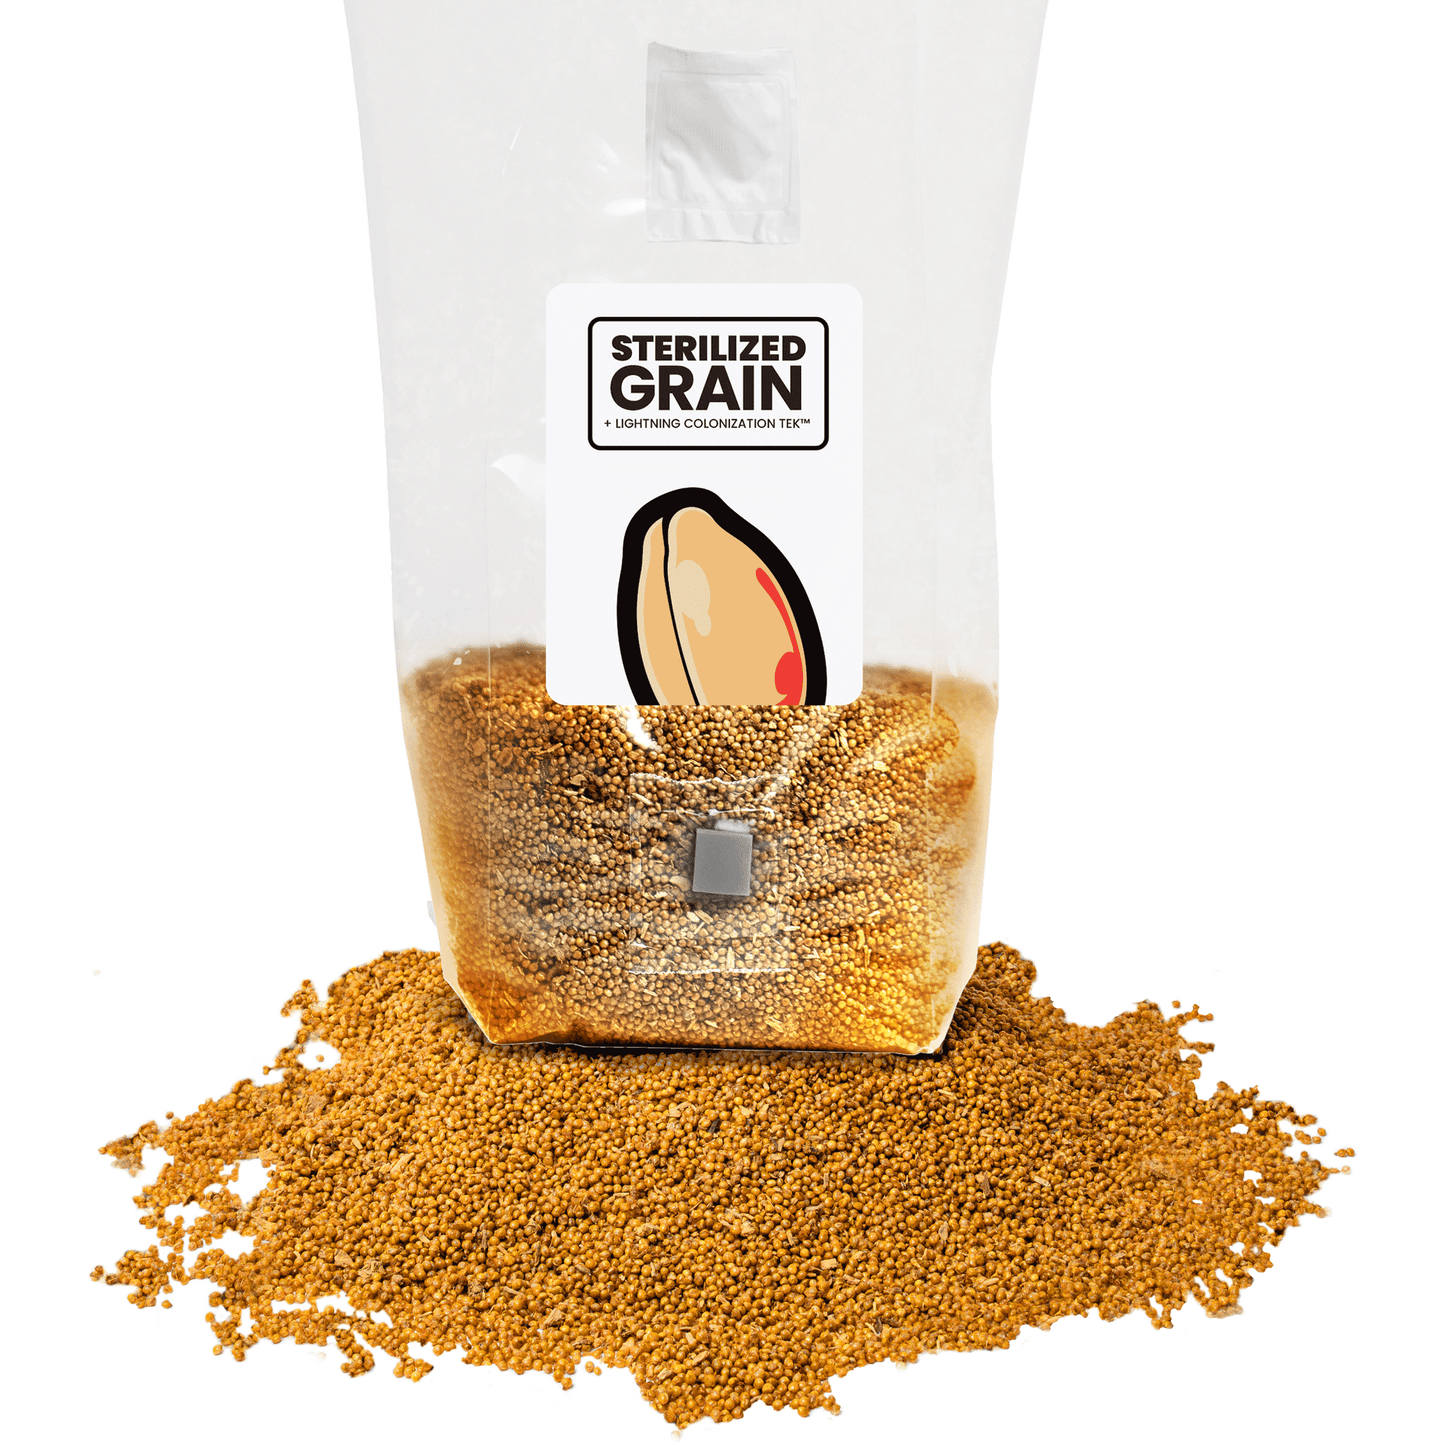 A 'Sterilized Grain' bag now open with millet grains spilling out onto a white surface, emphasizing the product's ready-to-use quality.